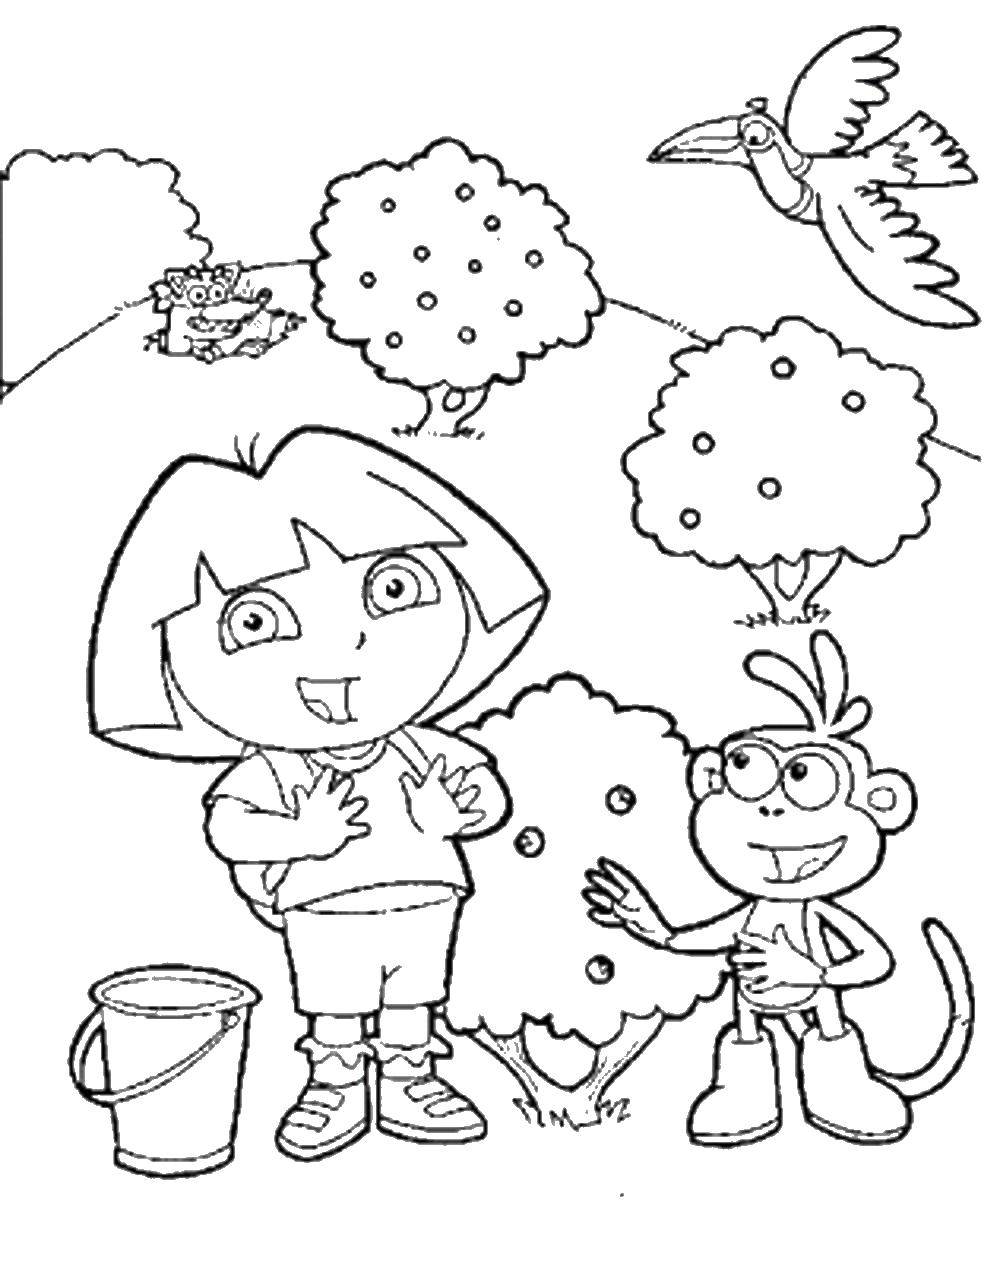 Coloring Dasha collects berries with slipper. Category Dora. Tags:  Dasha traveler, slipper.